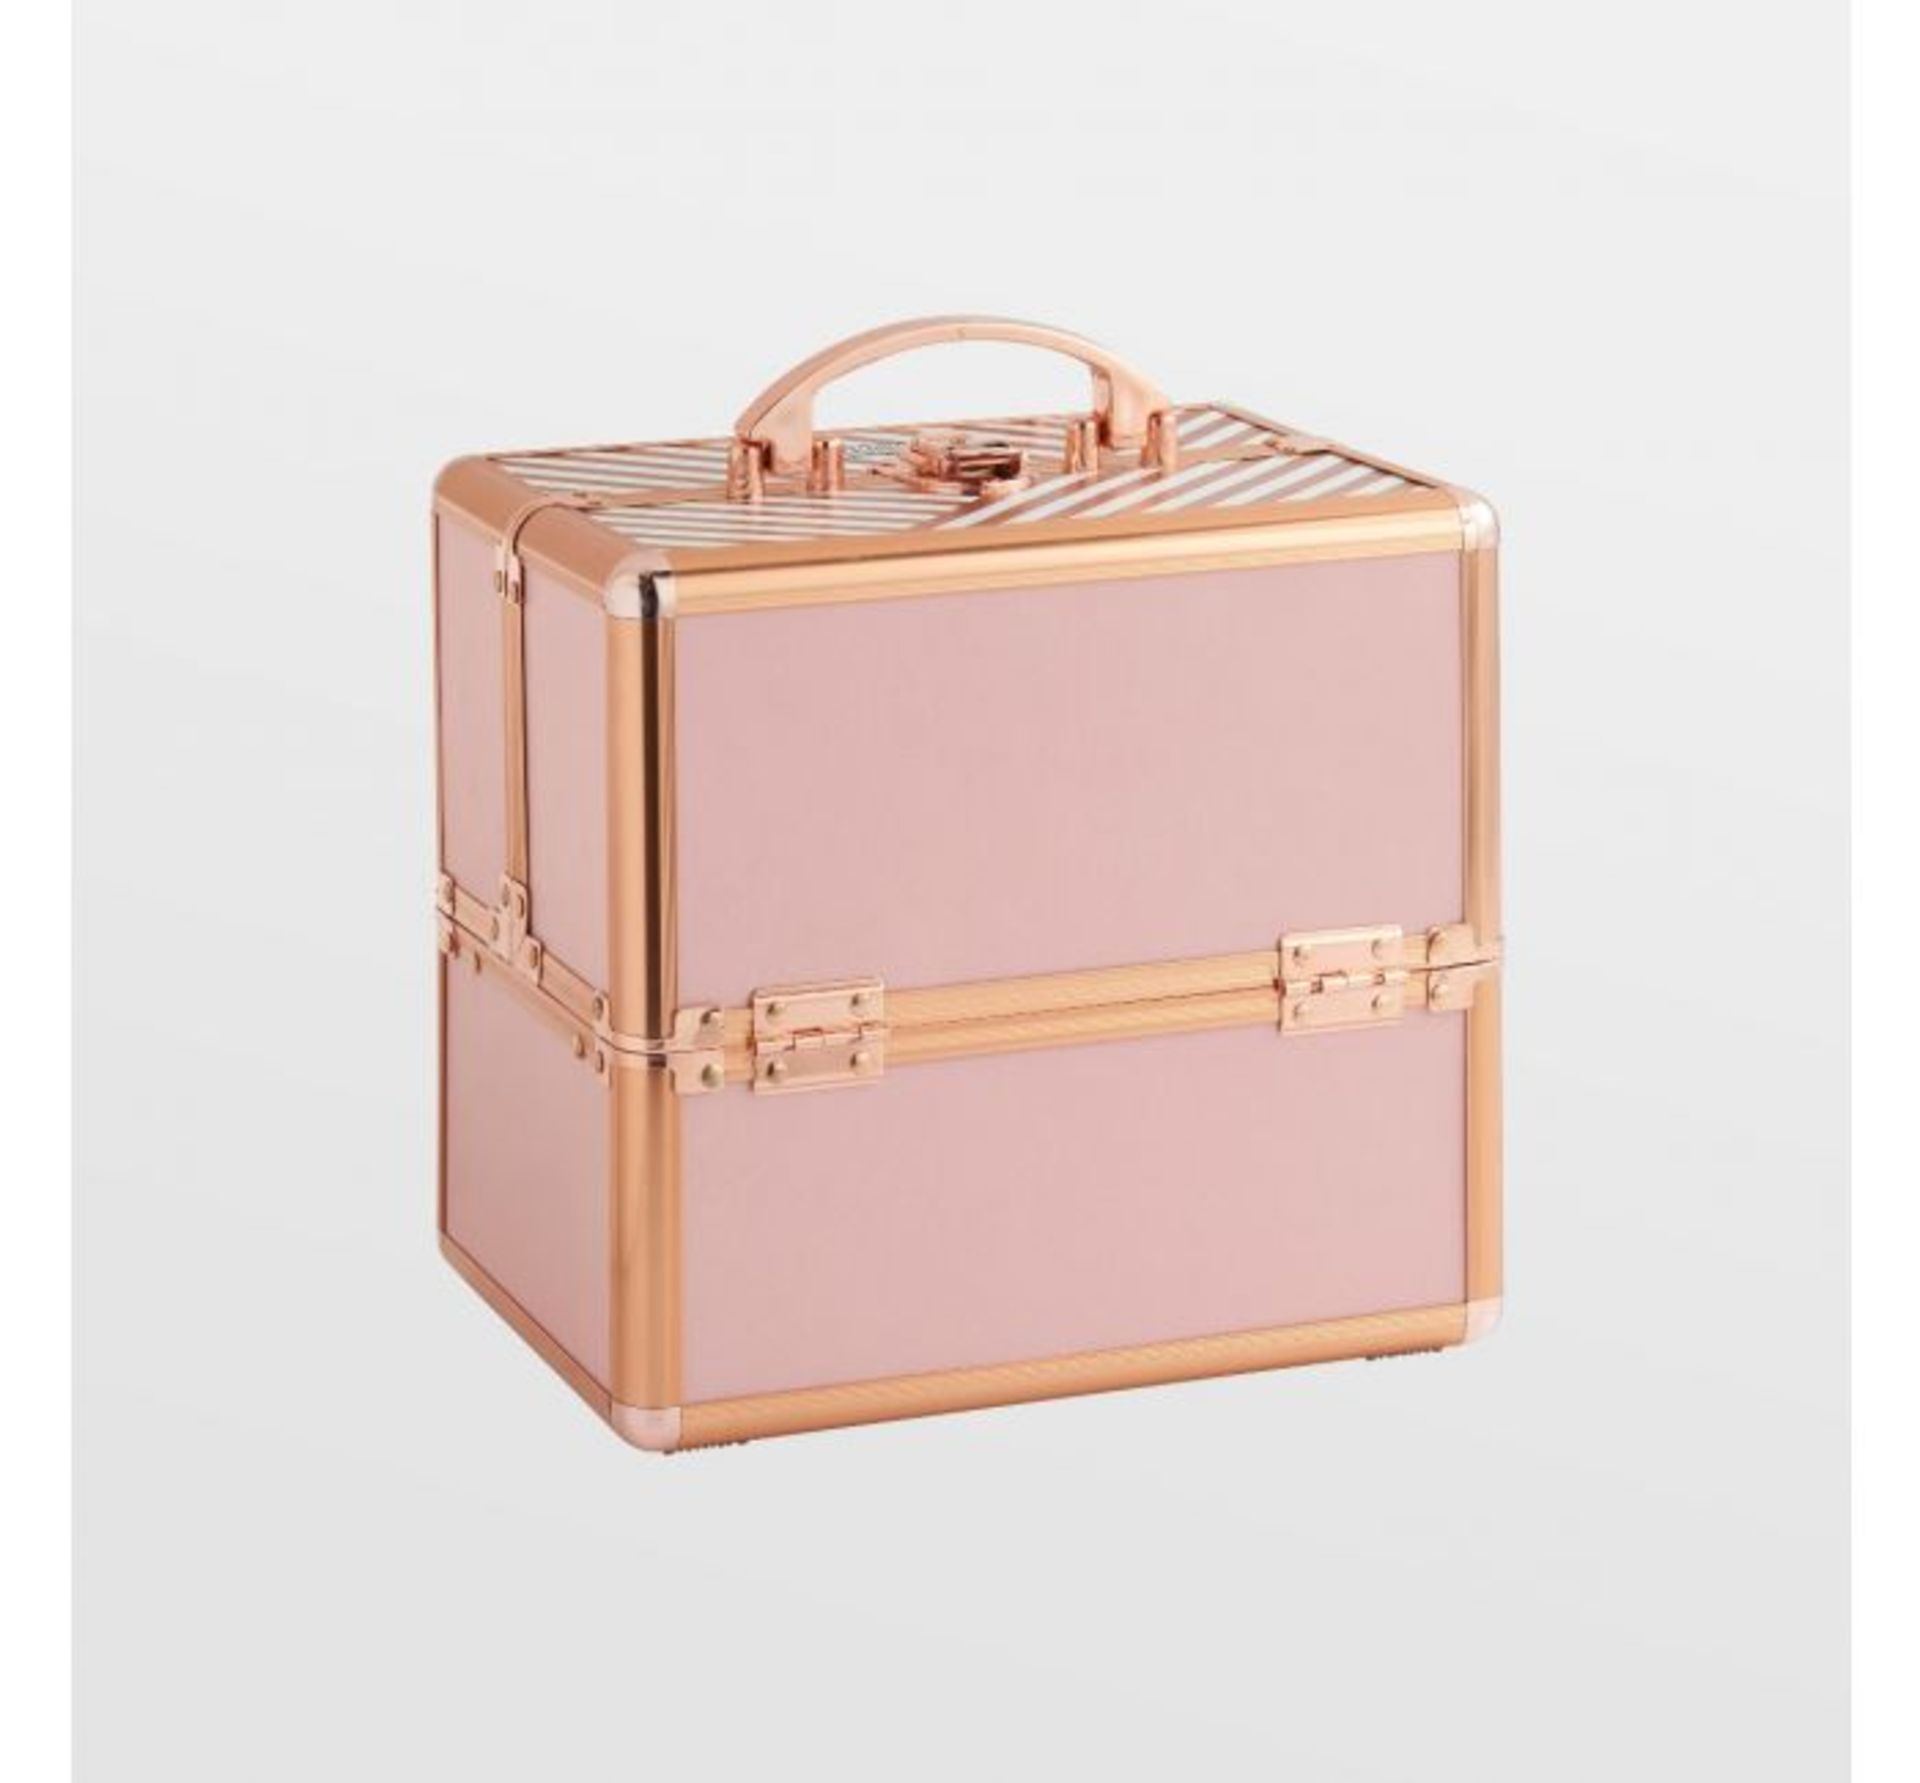 (HZ13) Small Blush Pink Makeup Case. Spacious design with four fixed dividers which create six ... - Image 2 of 3